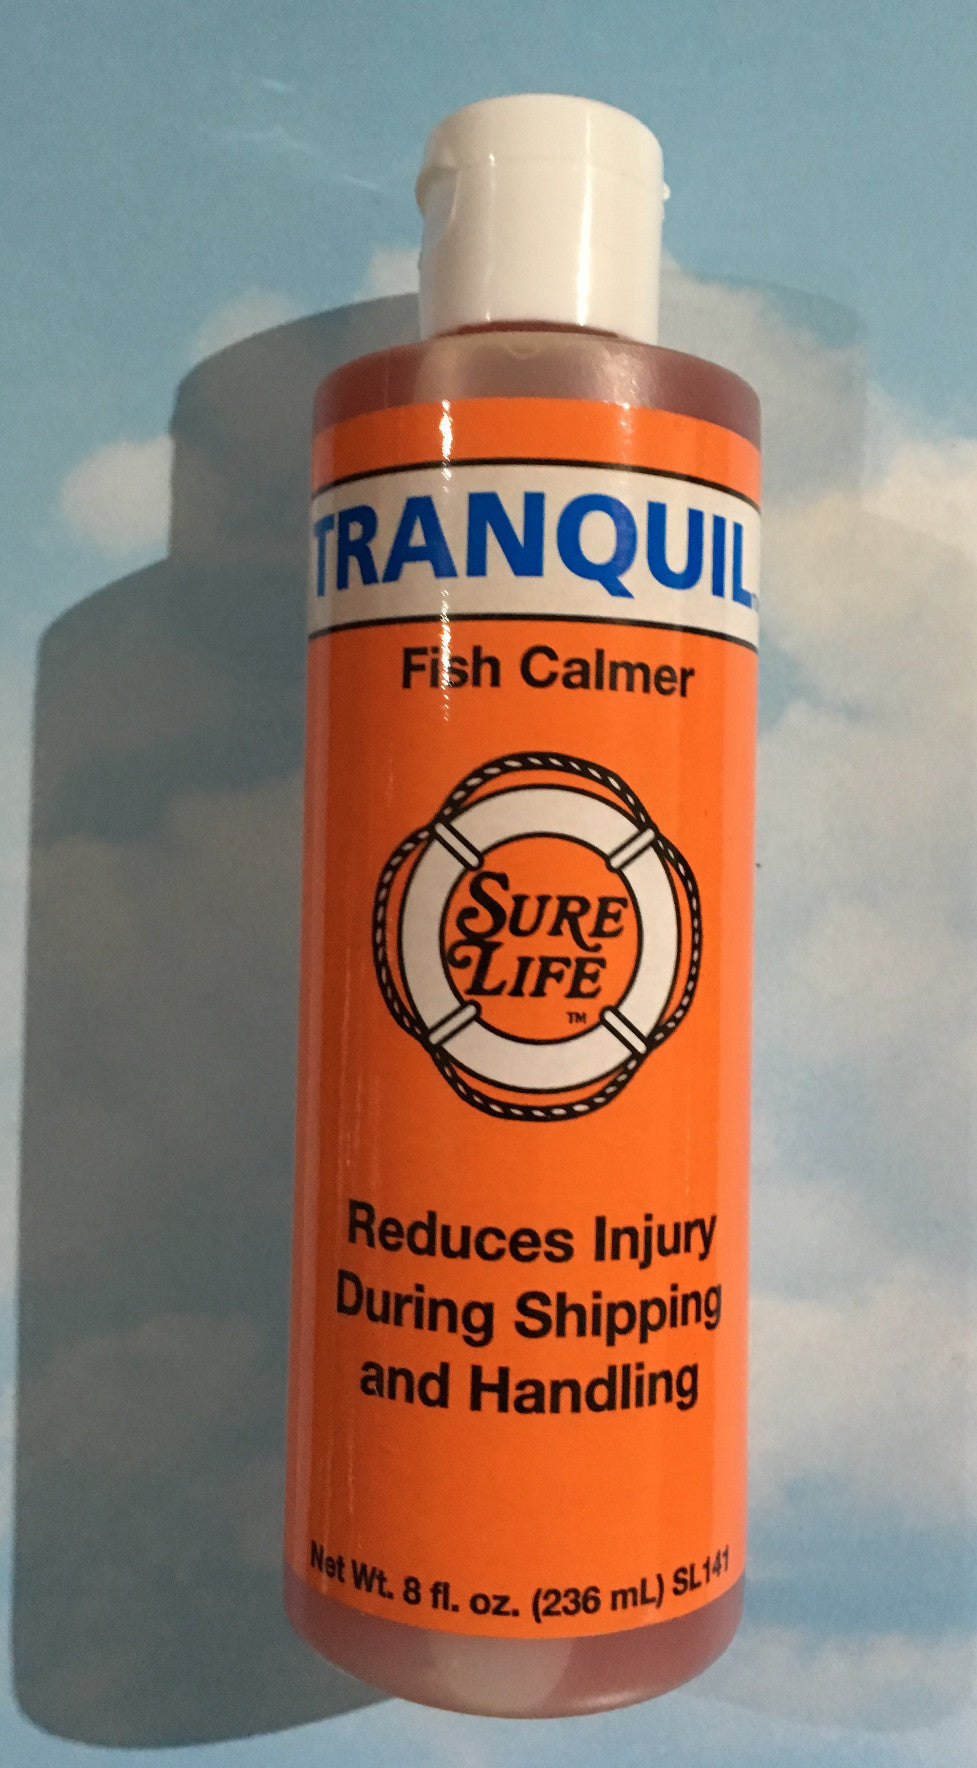 TRANQUIL FISH CALMER  FOR USE IN SAFE SHIPPING OF FISH by Sure Life